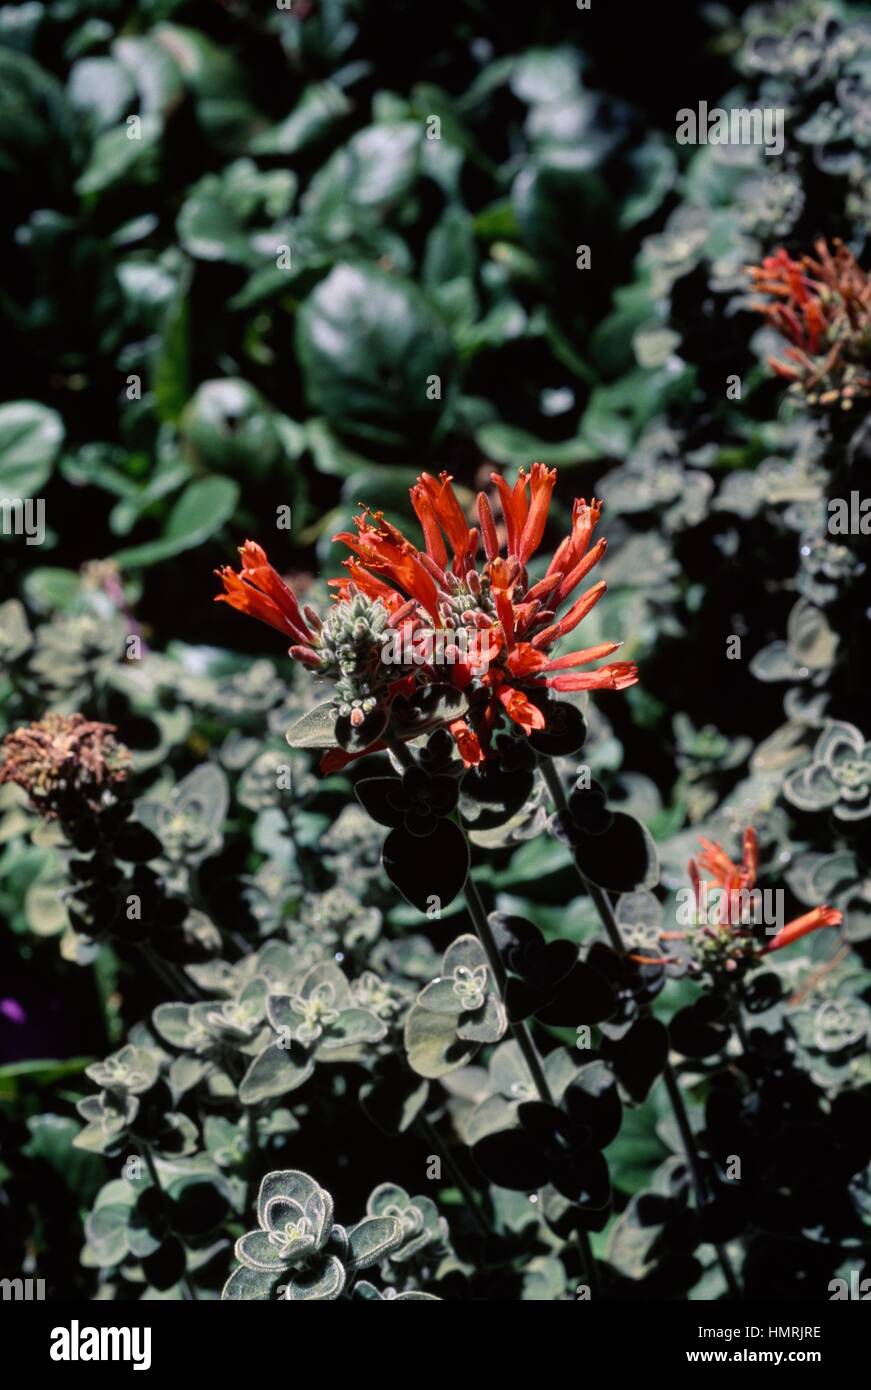 King's crown or Hummingbird bush (Dicliptera suberecta), Acanthaceae. Stock Photo